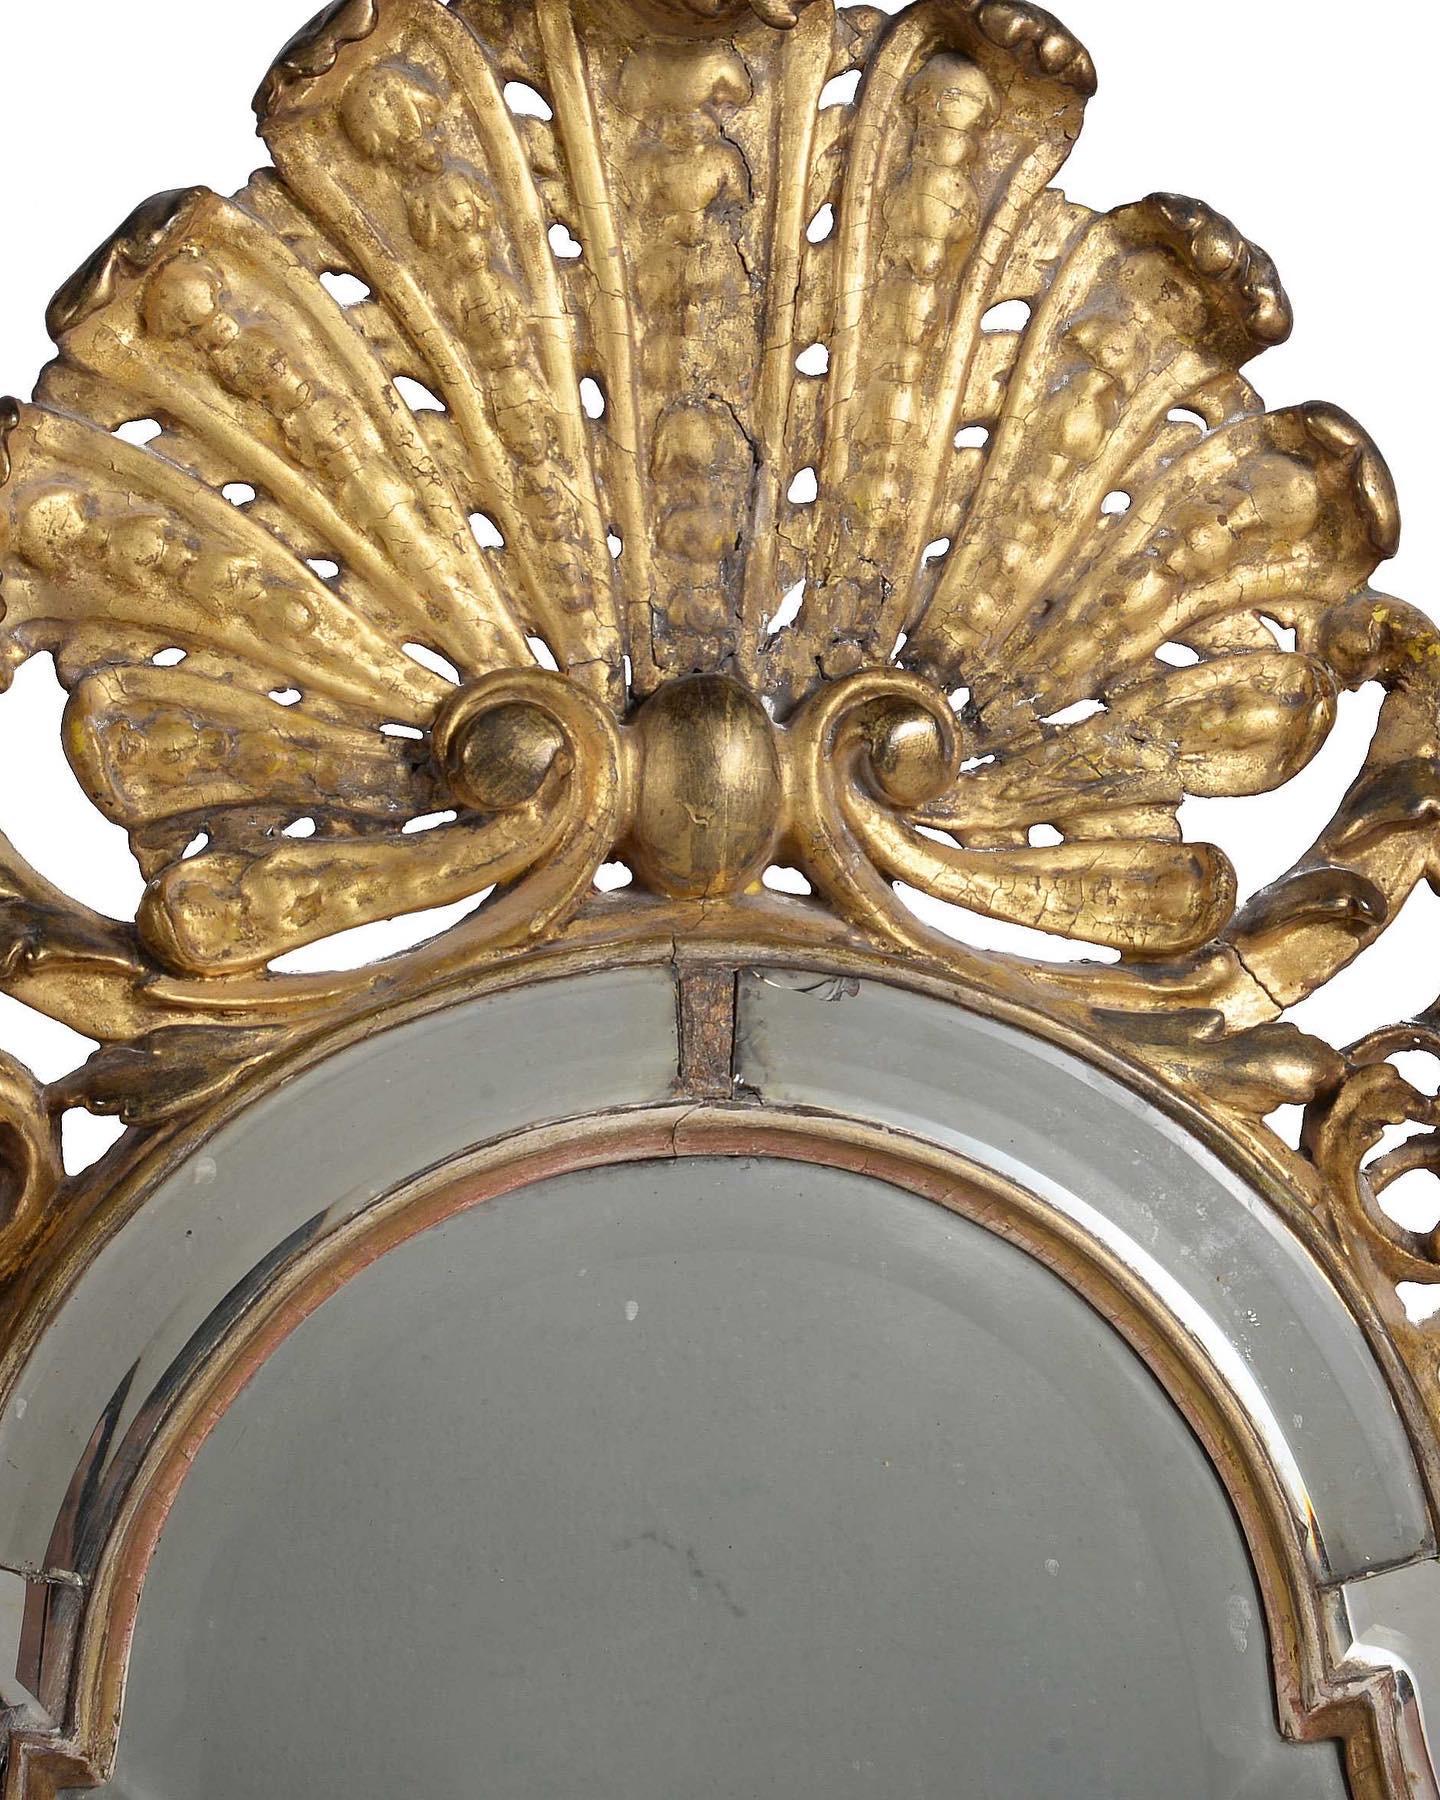 A rare Queen Anne carved giltwood and gesso wall mirror, c.1710. Surmounted by a large Baroque shell, above a bevelled arched central plate and framed by marginal plates.

Measures - 105 cm H x 57 cm W.

